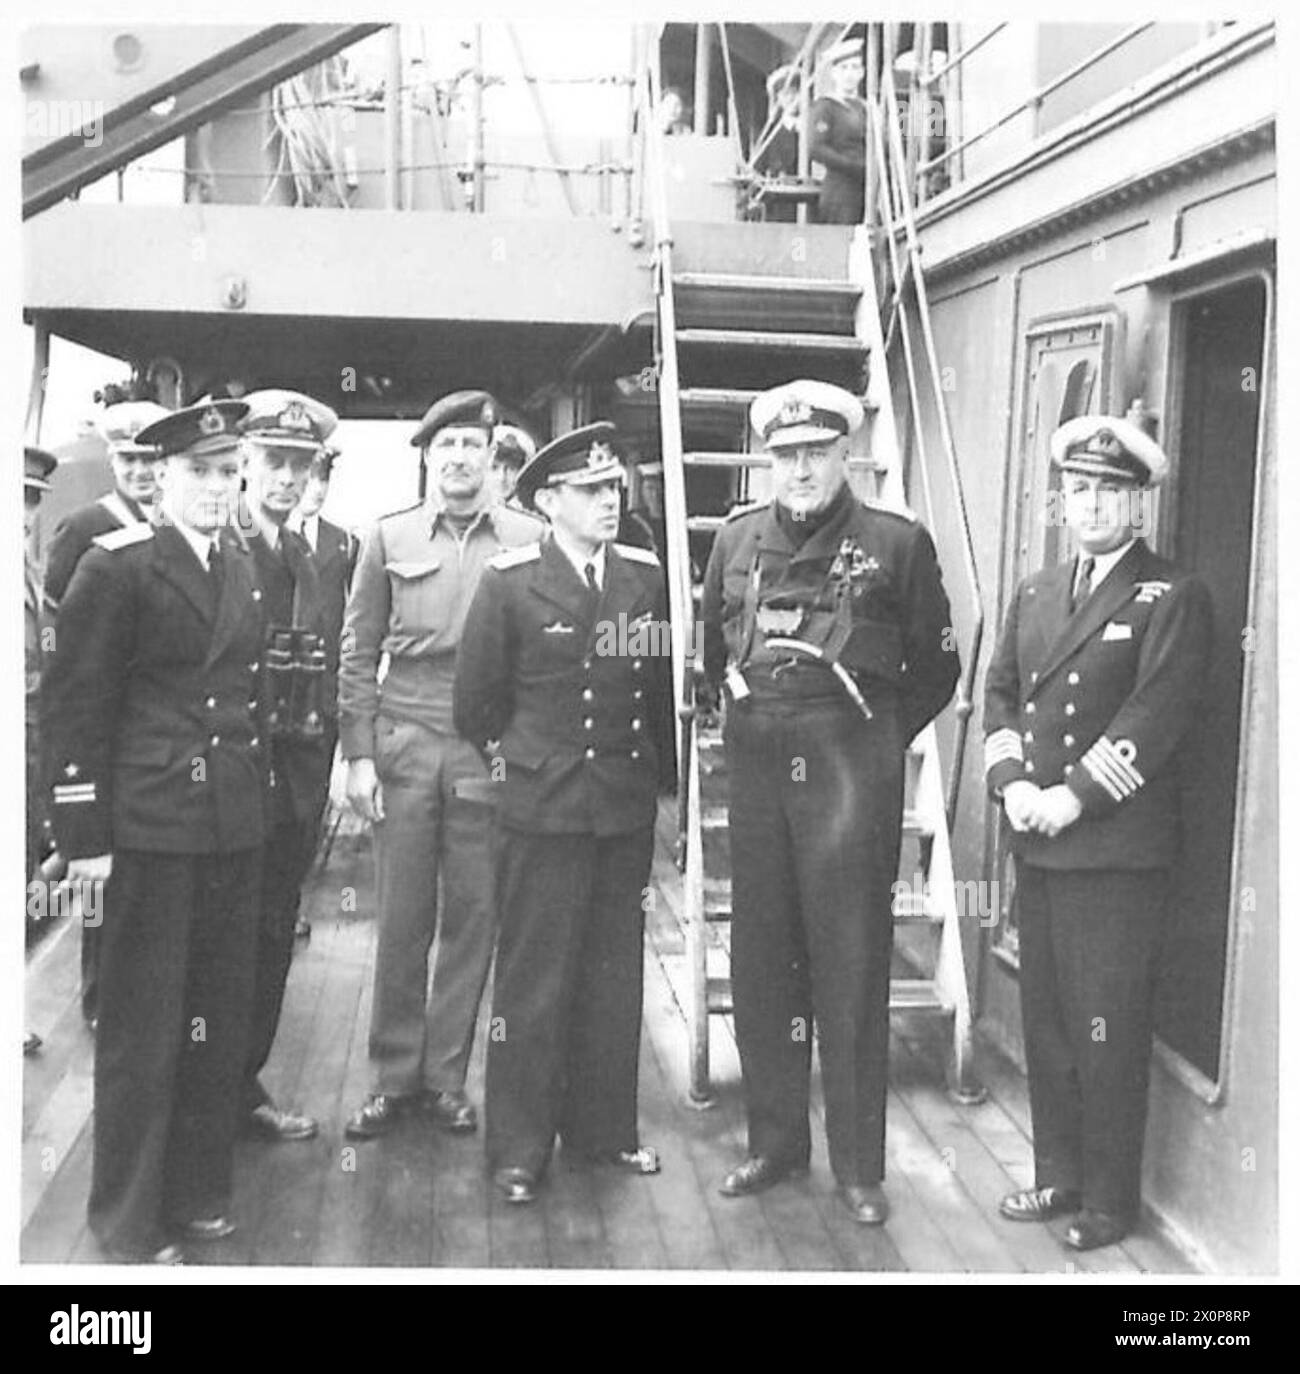 ITALY : ALLIED LANDING AT ANZIO - Rear Admiral Frolov of the Russian Navy with Rear Admiral T.H. Troubridge on board his command ship HMS 'Bololo' off Anzio, during recent landing operations. Admiral Frolov is the Russian expert on Combined Operations and came as an observer during the assaults on Anzio. Admiral Troubridge comes from a famous Naval family and one of his ancestors was the Naval captain under Nelson who landed and relieved Rome during the first year of the 19th century. The then Pope authorised Troubridge's ancestor to bear the Papal keys on his crest to signify the occasion. Th Stock Photo